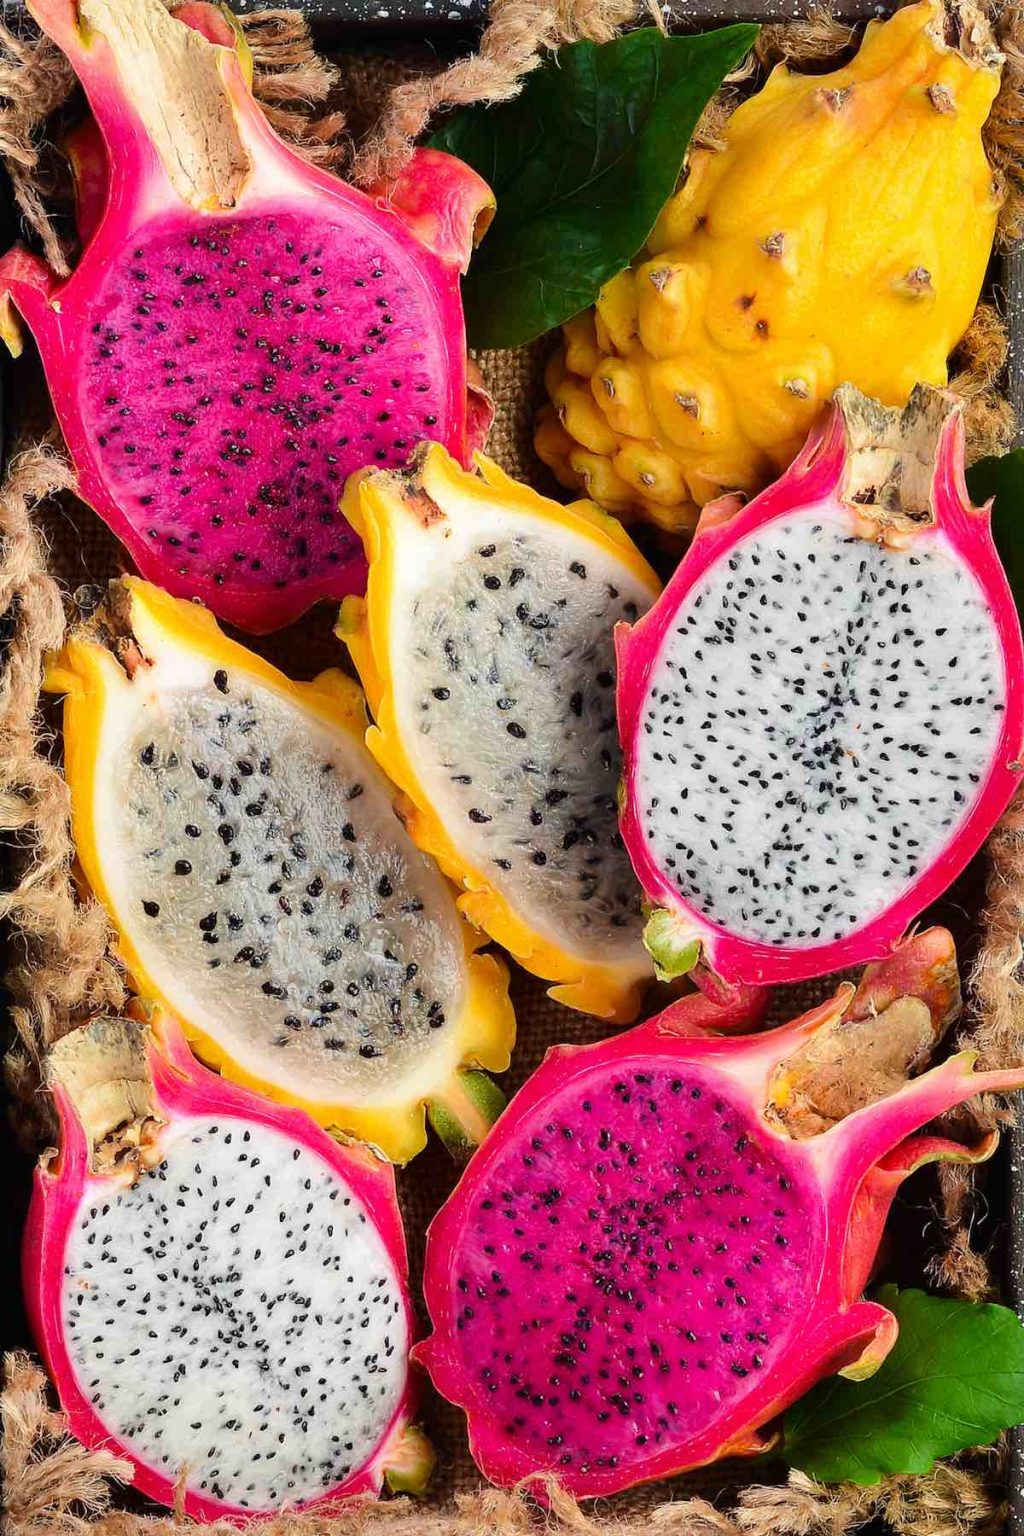 Yellow Pitaya is a popular exotic fruit with a sweet and mild taste. In this post you’ll learn about its health benefits, how to buy and how to eat yellow dragon fruit!